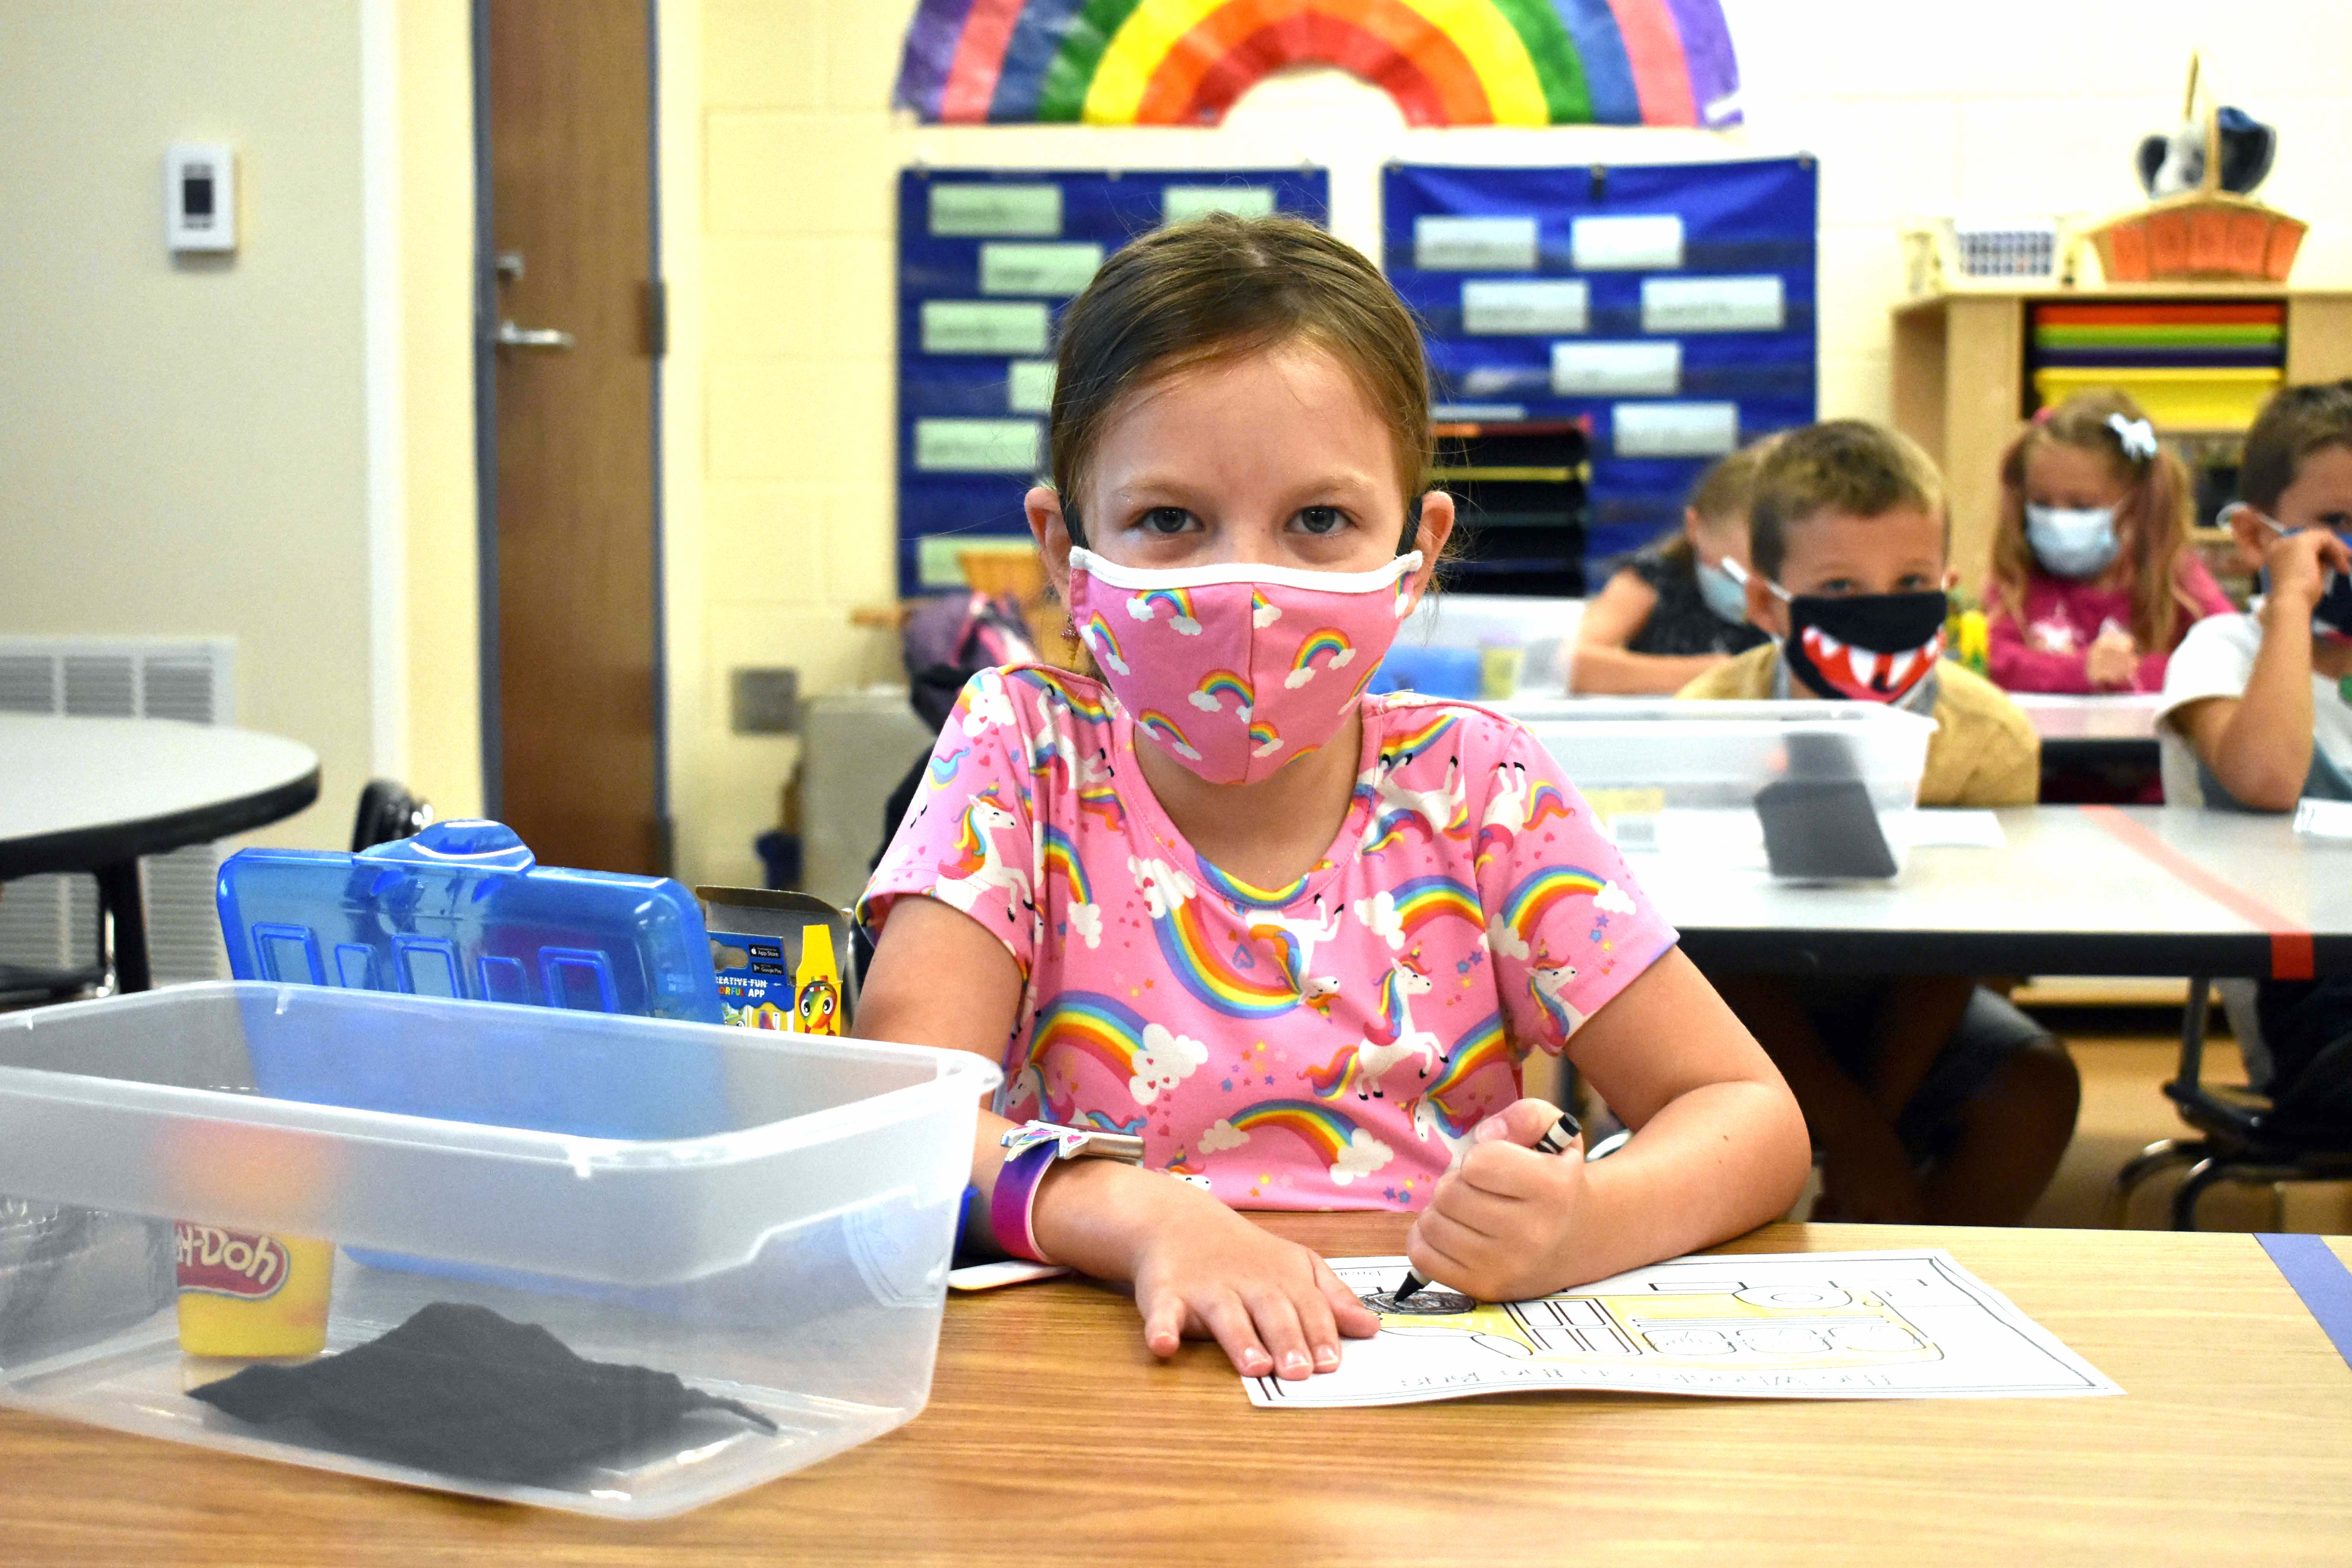 South-Western City School District will bring students back early to help get them reacclimated to the school routine, which will include wearing masks in class and following other safety measures. 